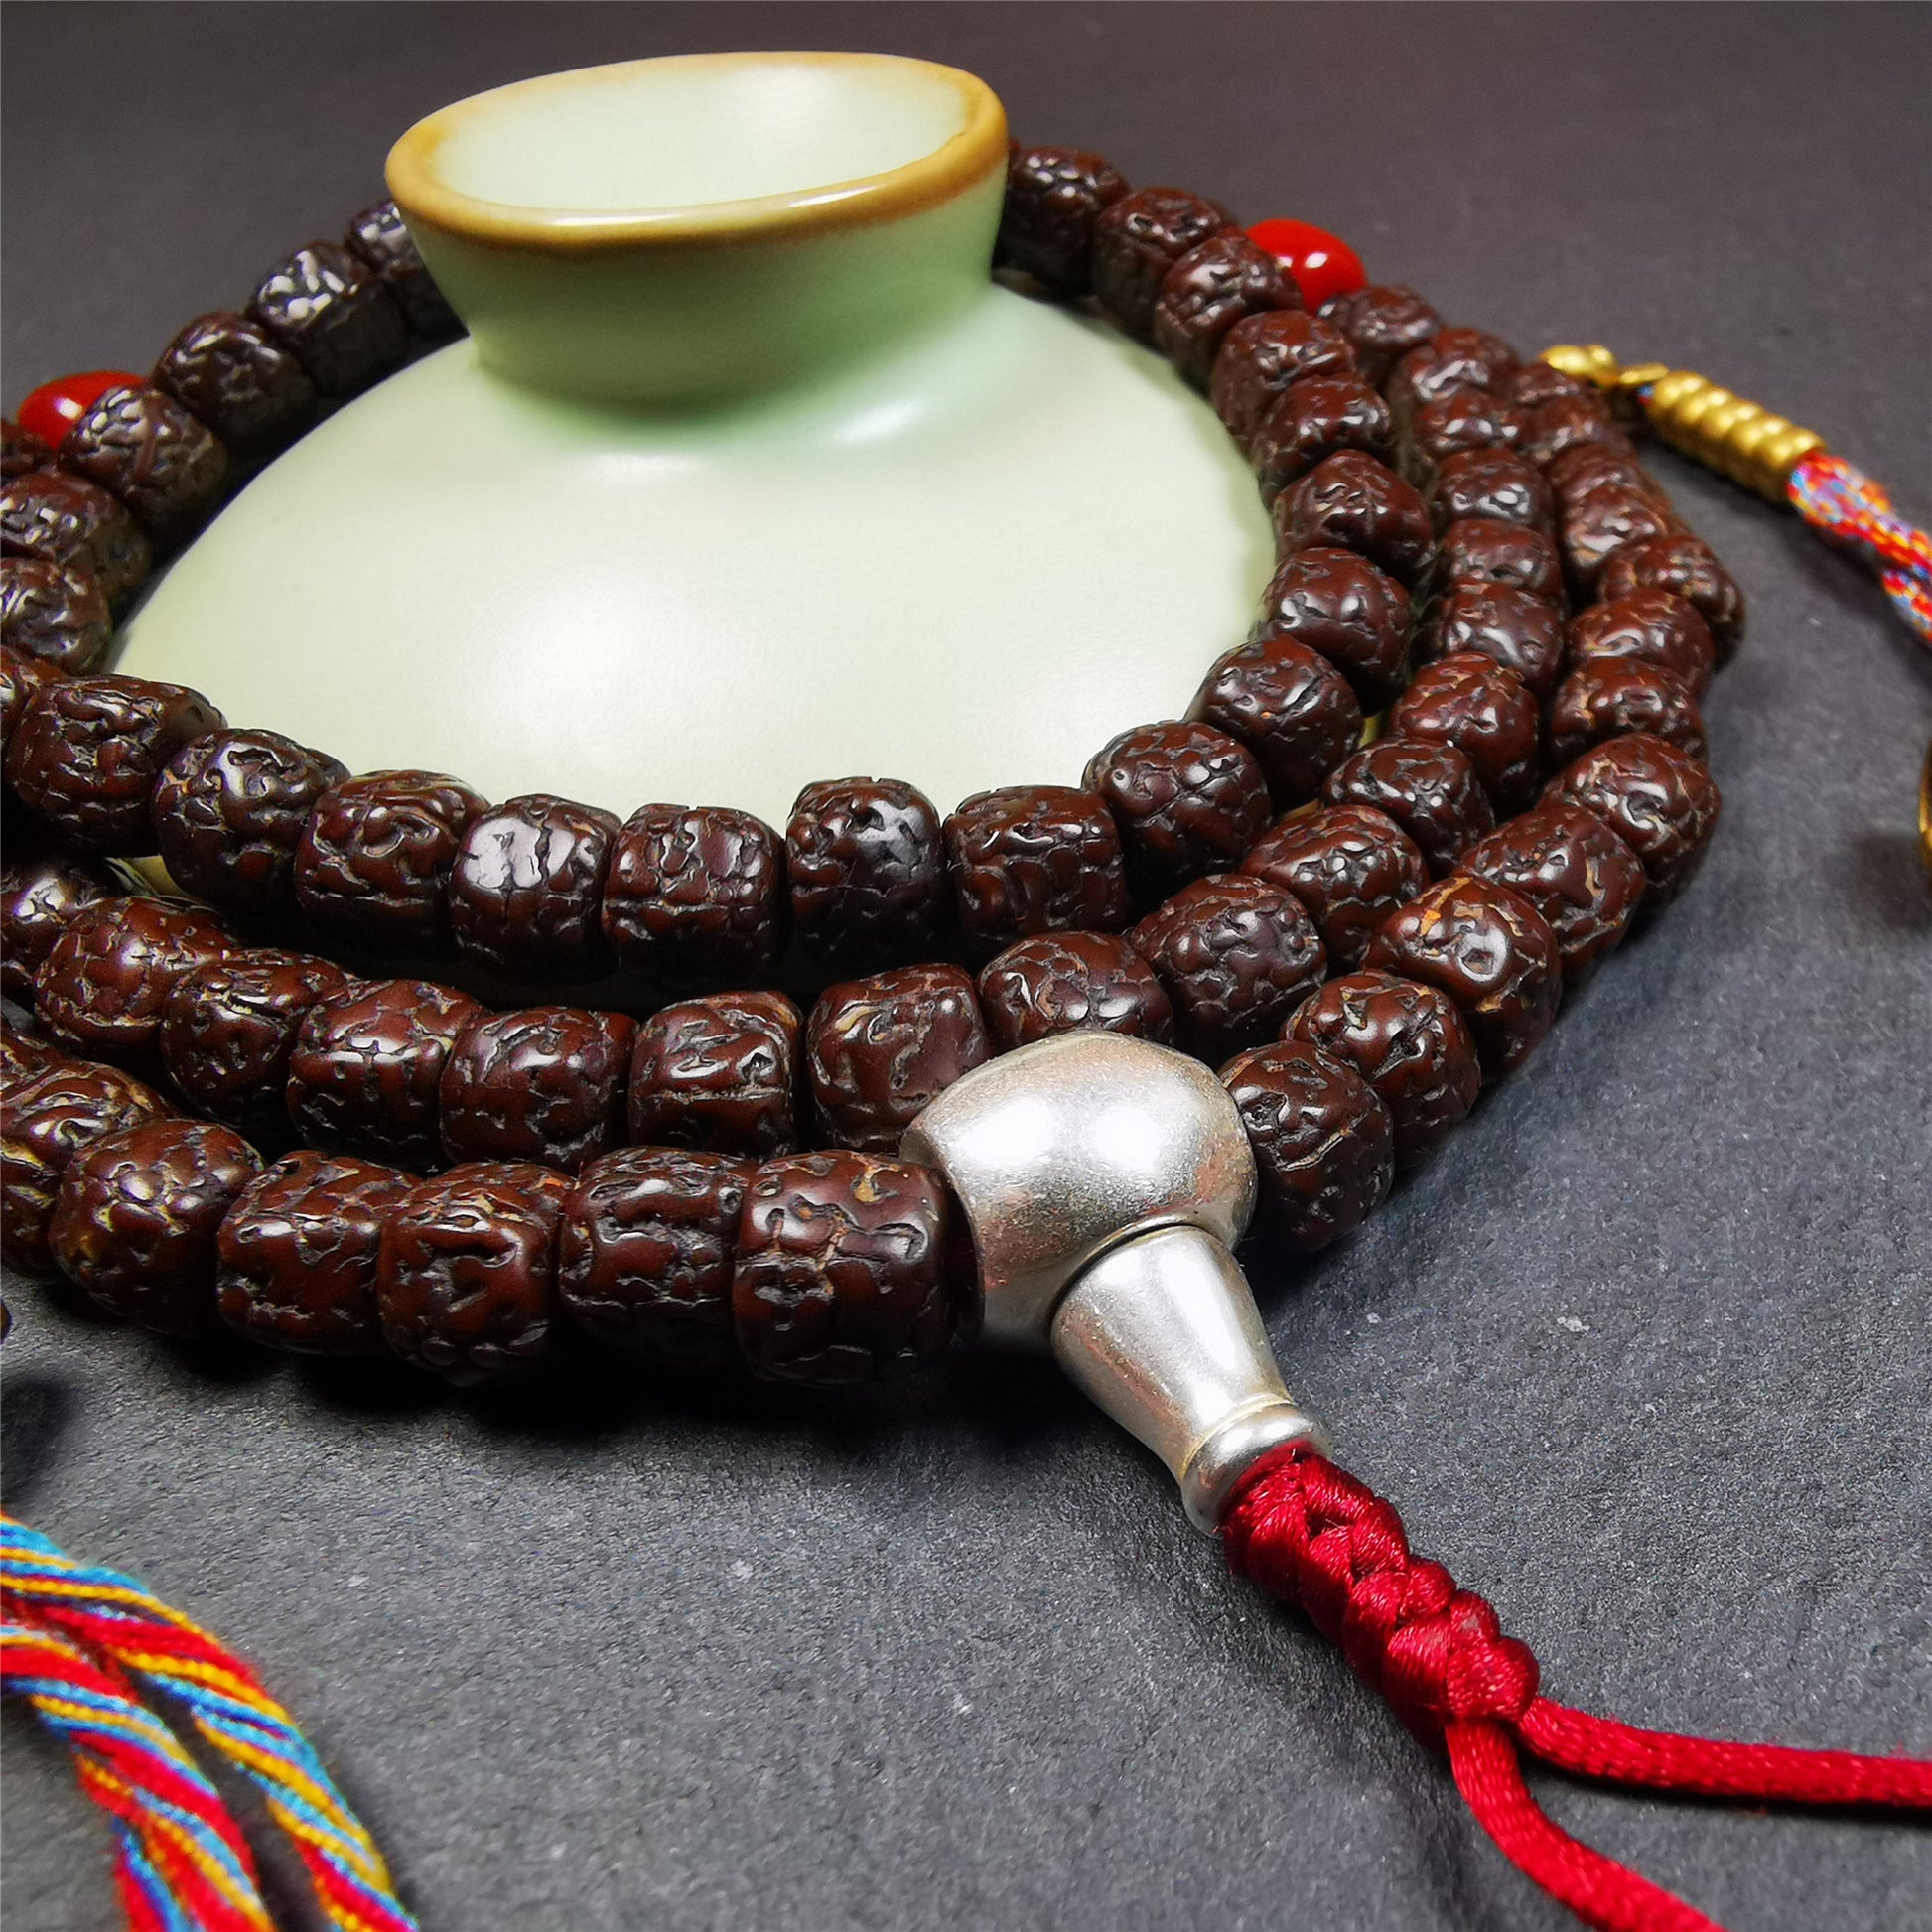 This old Rudraksha mala was handmade from tibetan crafts man in Baiyu County. It's composed of 108 pcs 8mm Rudraksha beads,with agate beads,1 pair of bead counters,and guru bead.